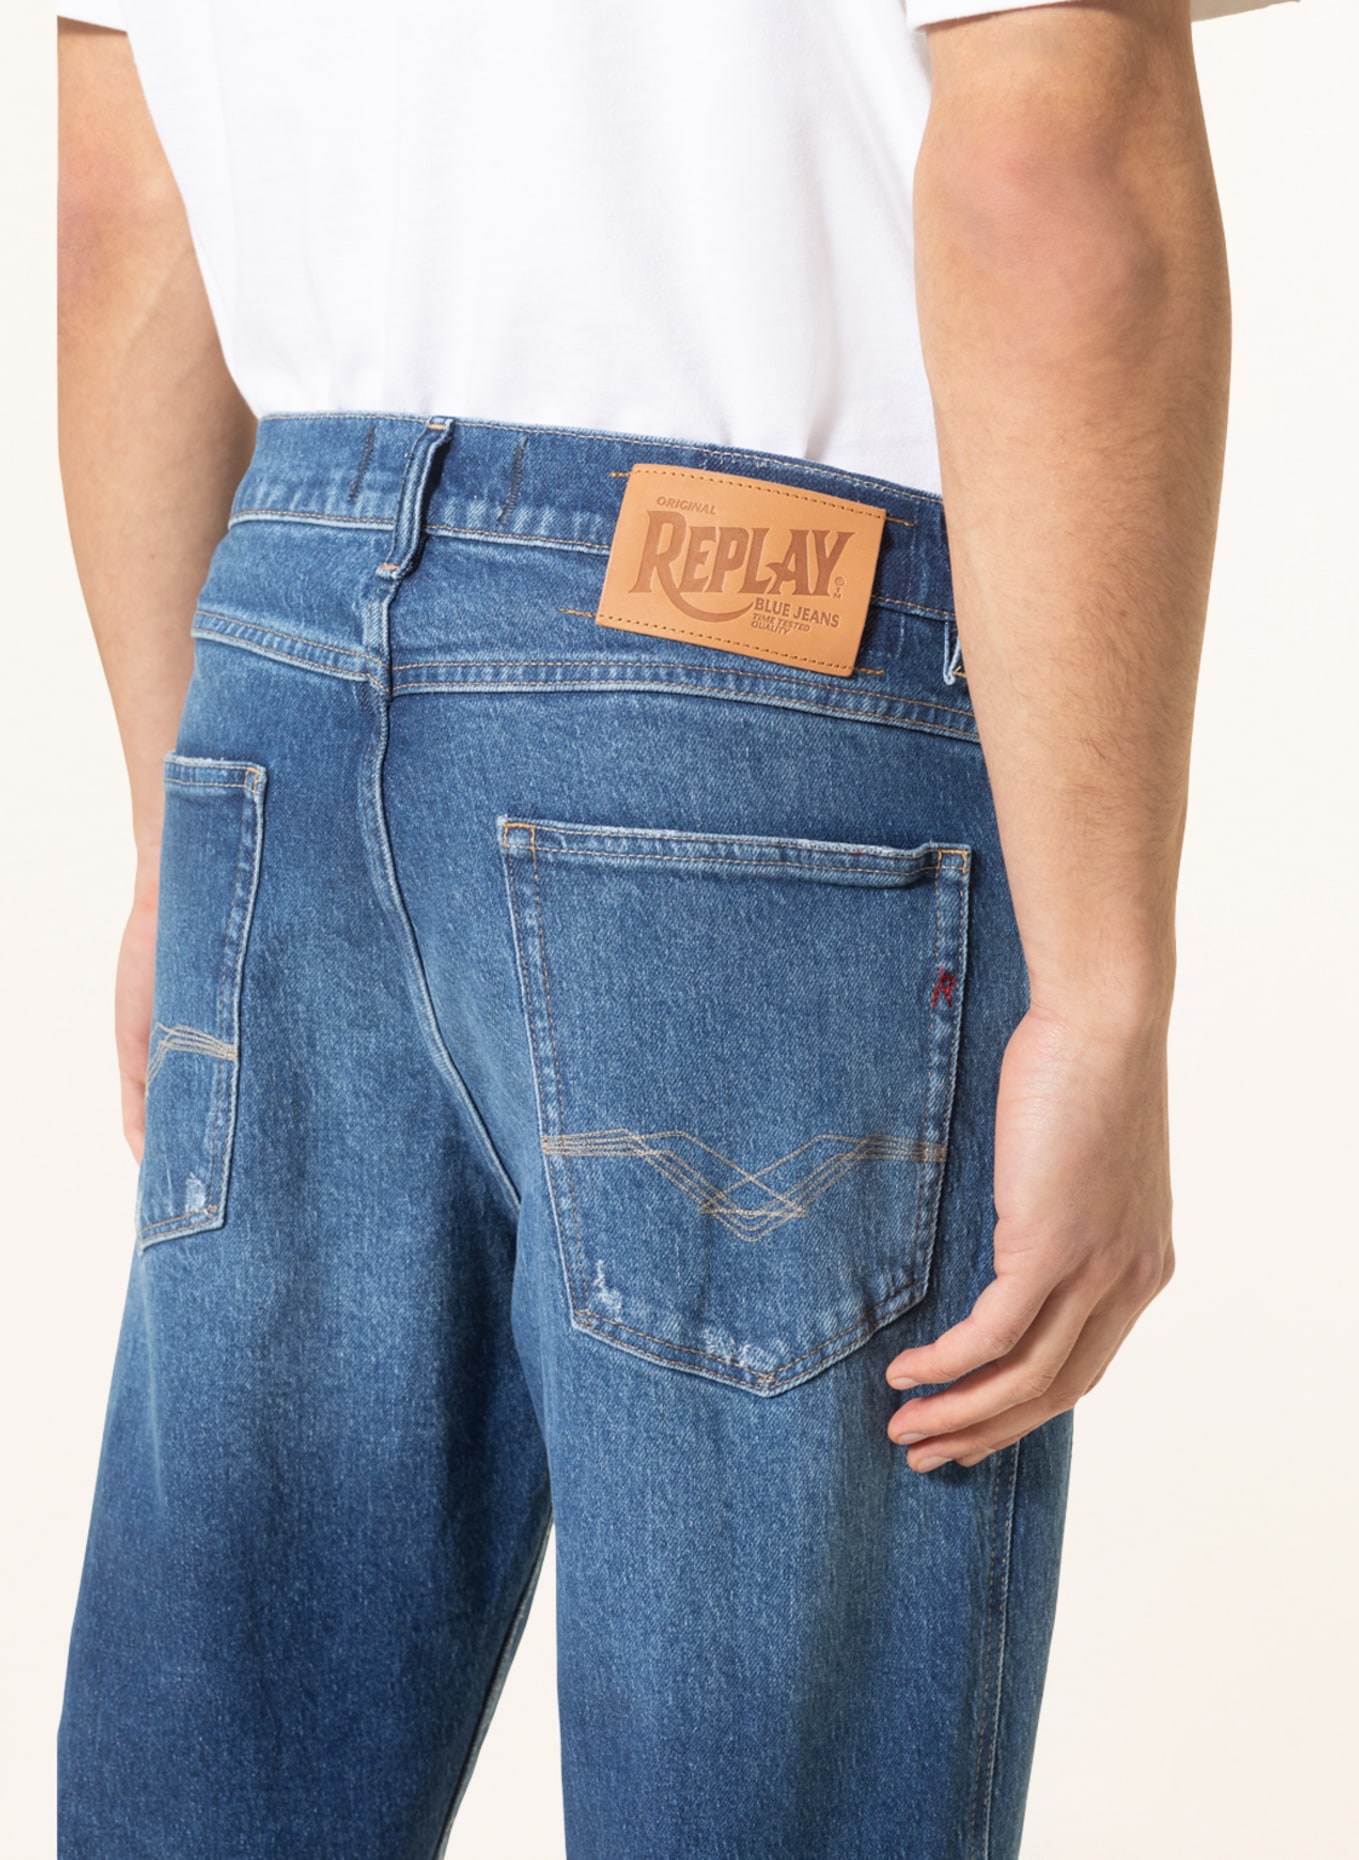 REPLAY Jeans SANDOT Relaxed Tapered Fit, Farbe: 009 MEDIUM BLUE (Bild 5)